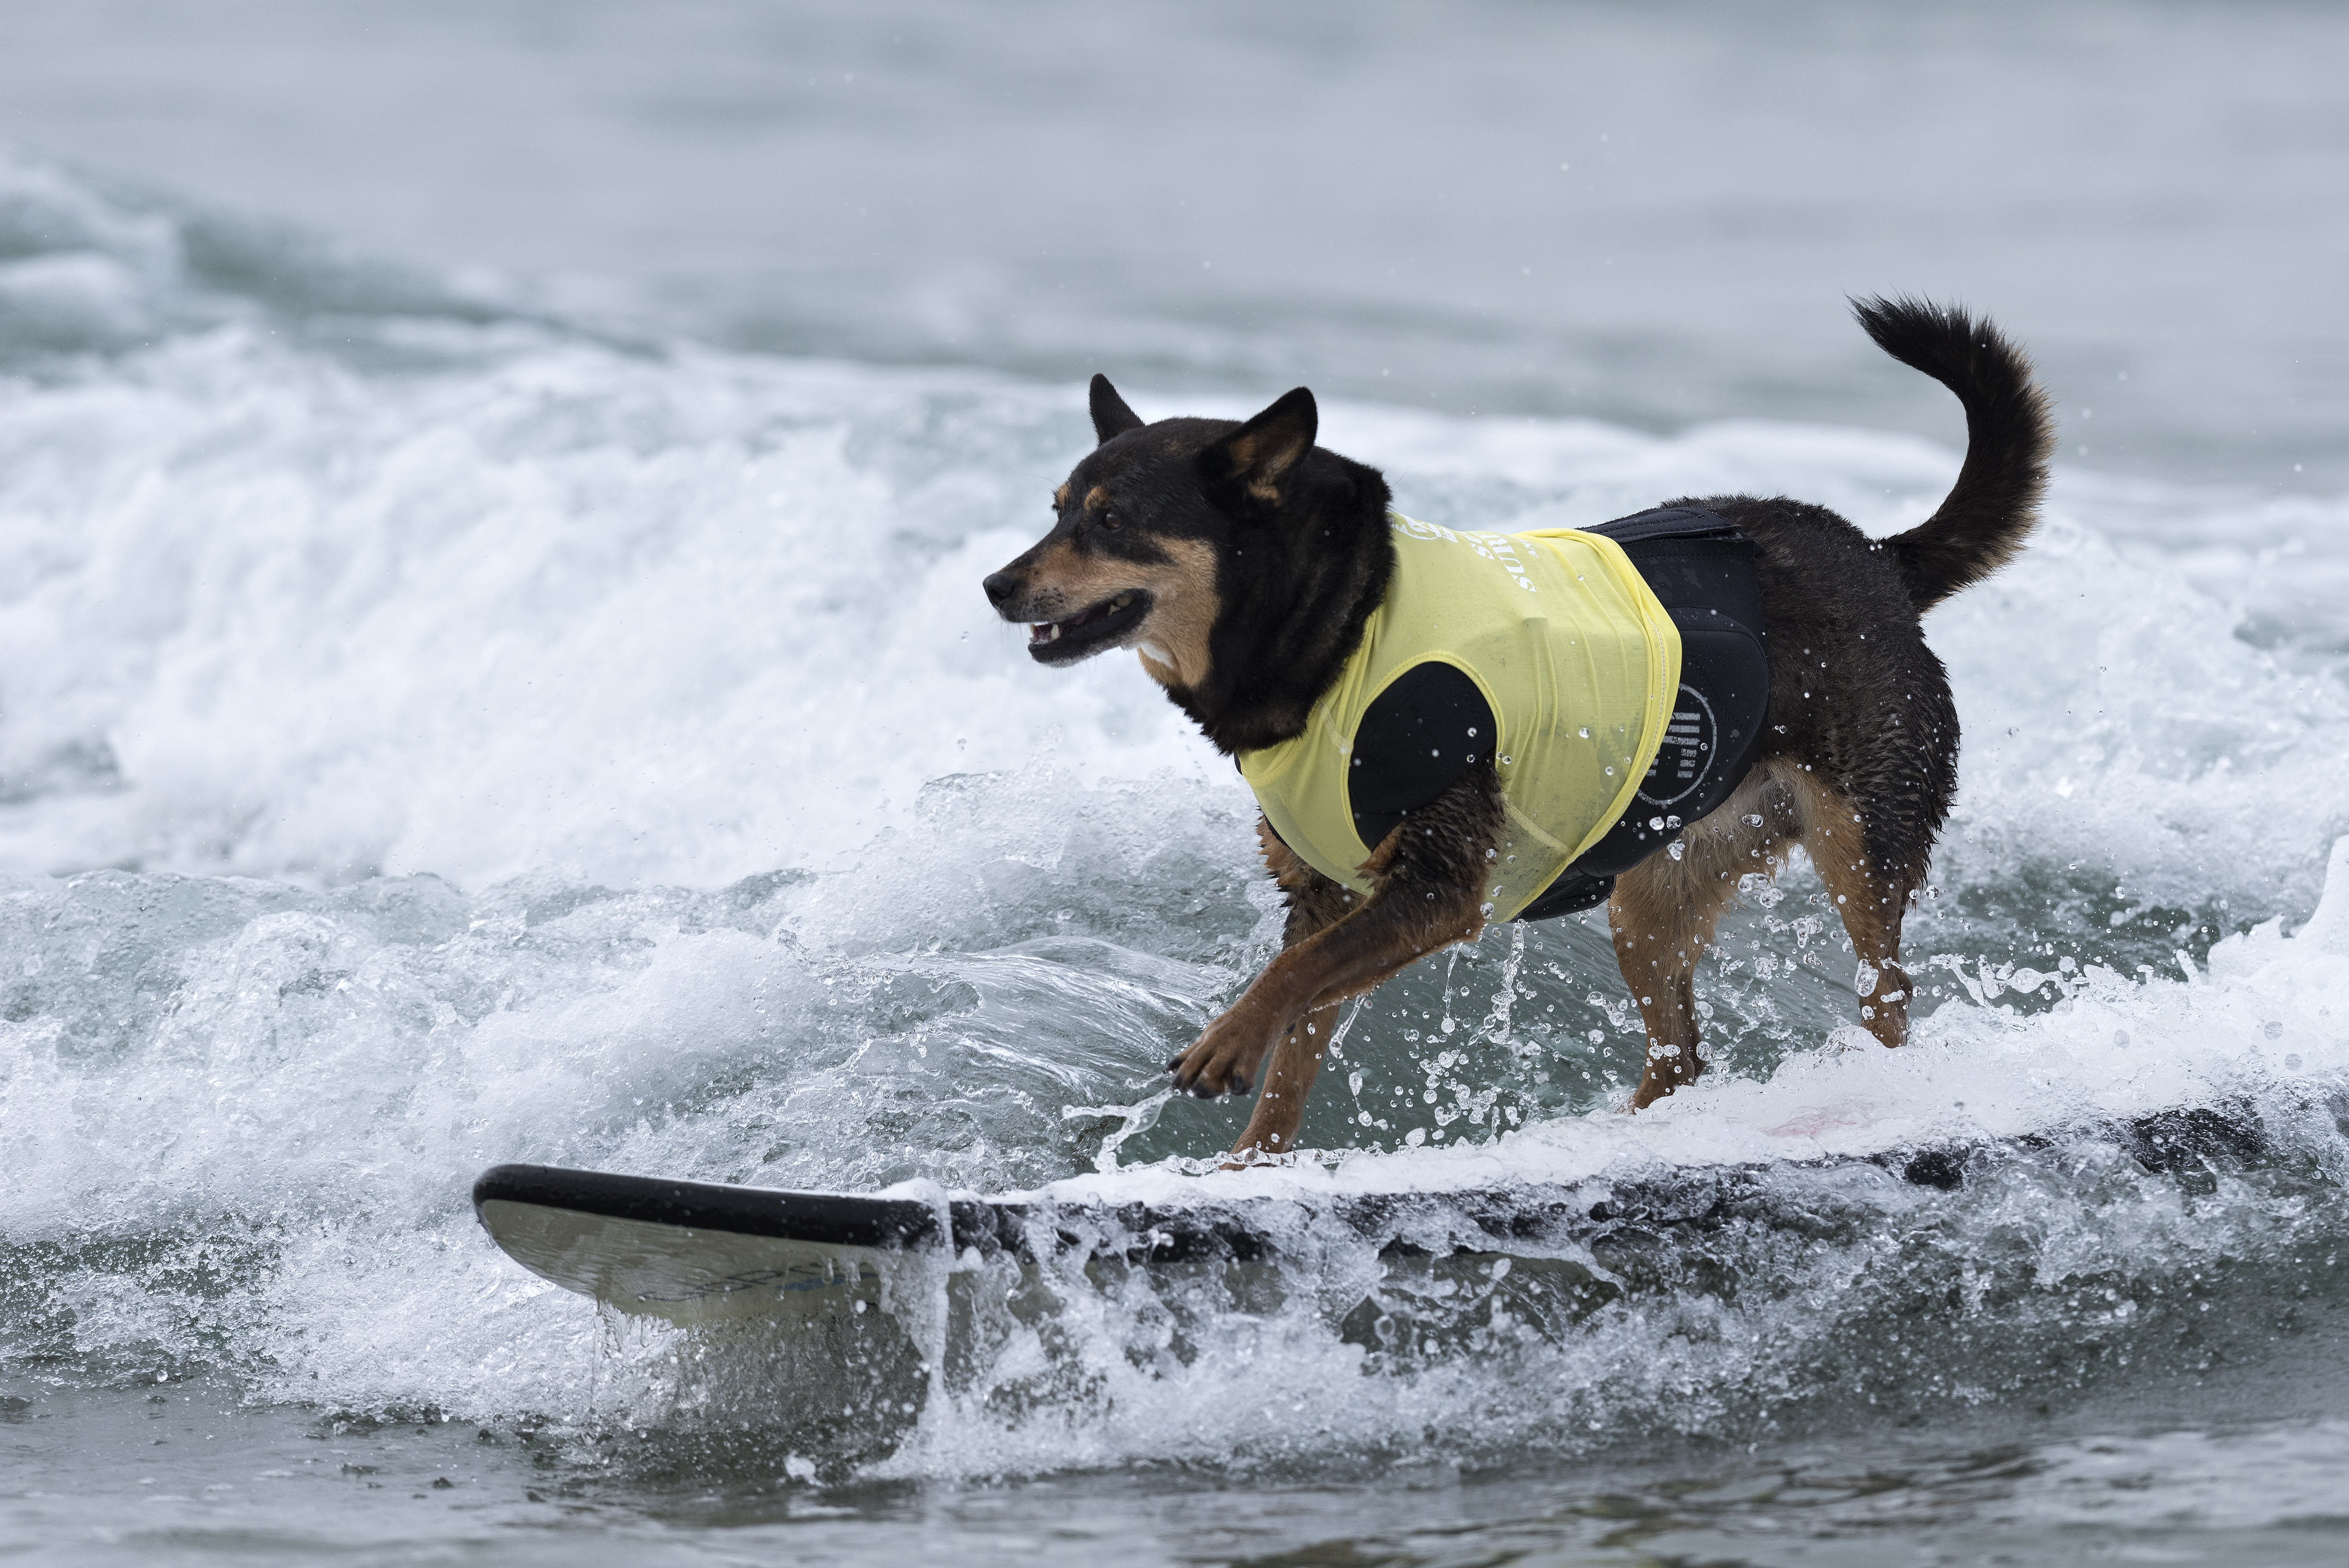 Surfer dog, Abbie, competes in the 11th annual Helen Woodward Animal Centers Surf Dog Surf-A-Thon in Del Mar, California. October 2, 2016. (NurPhoto—NurPhoto via Getty Images)